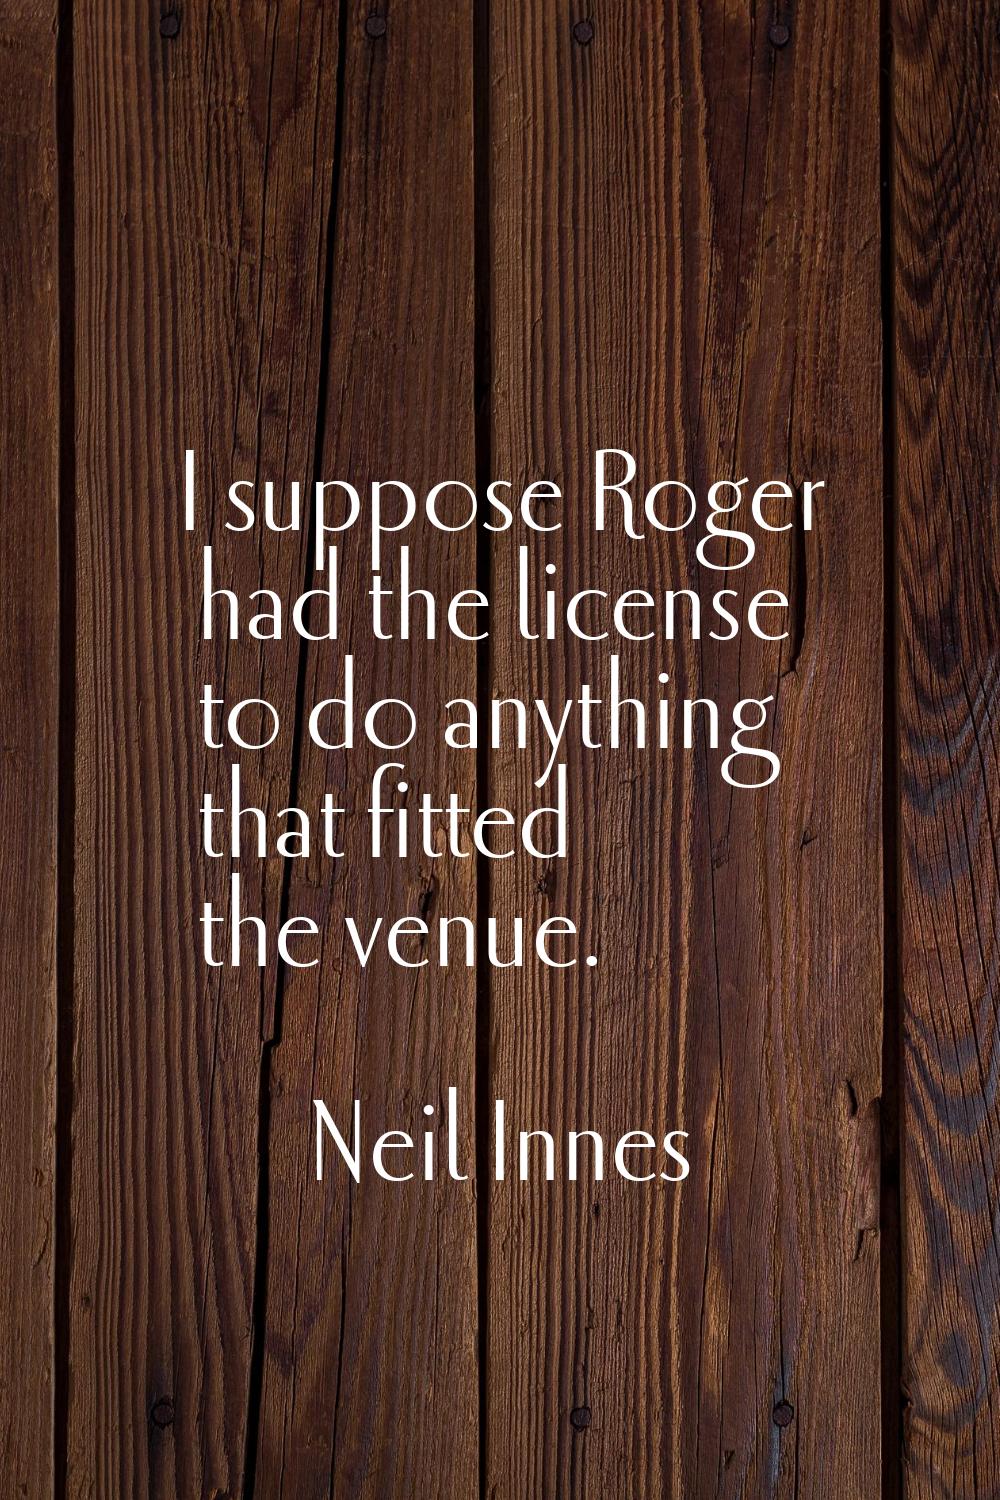 I suppose Roger had the license to do anything that fitted the venue.